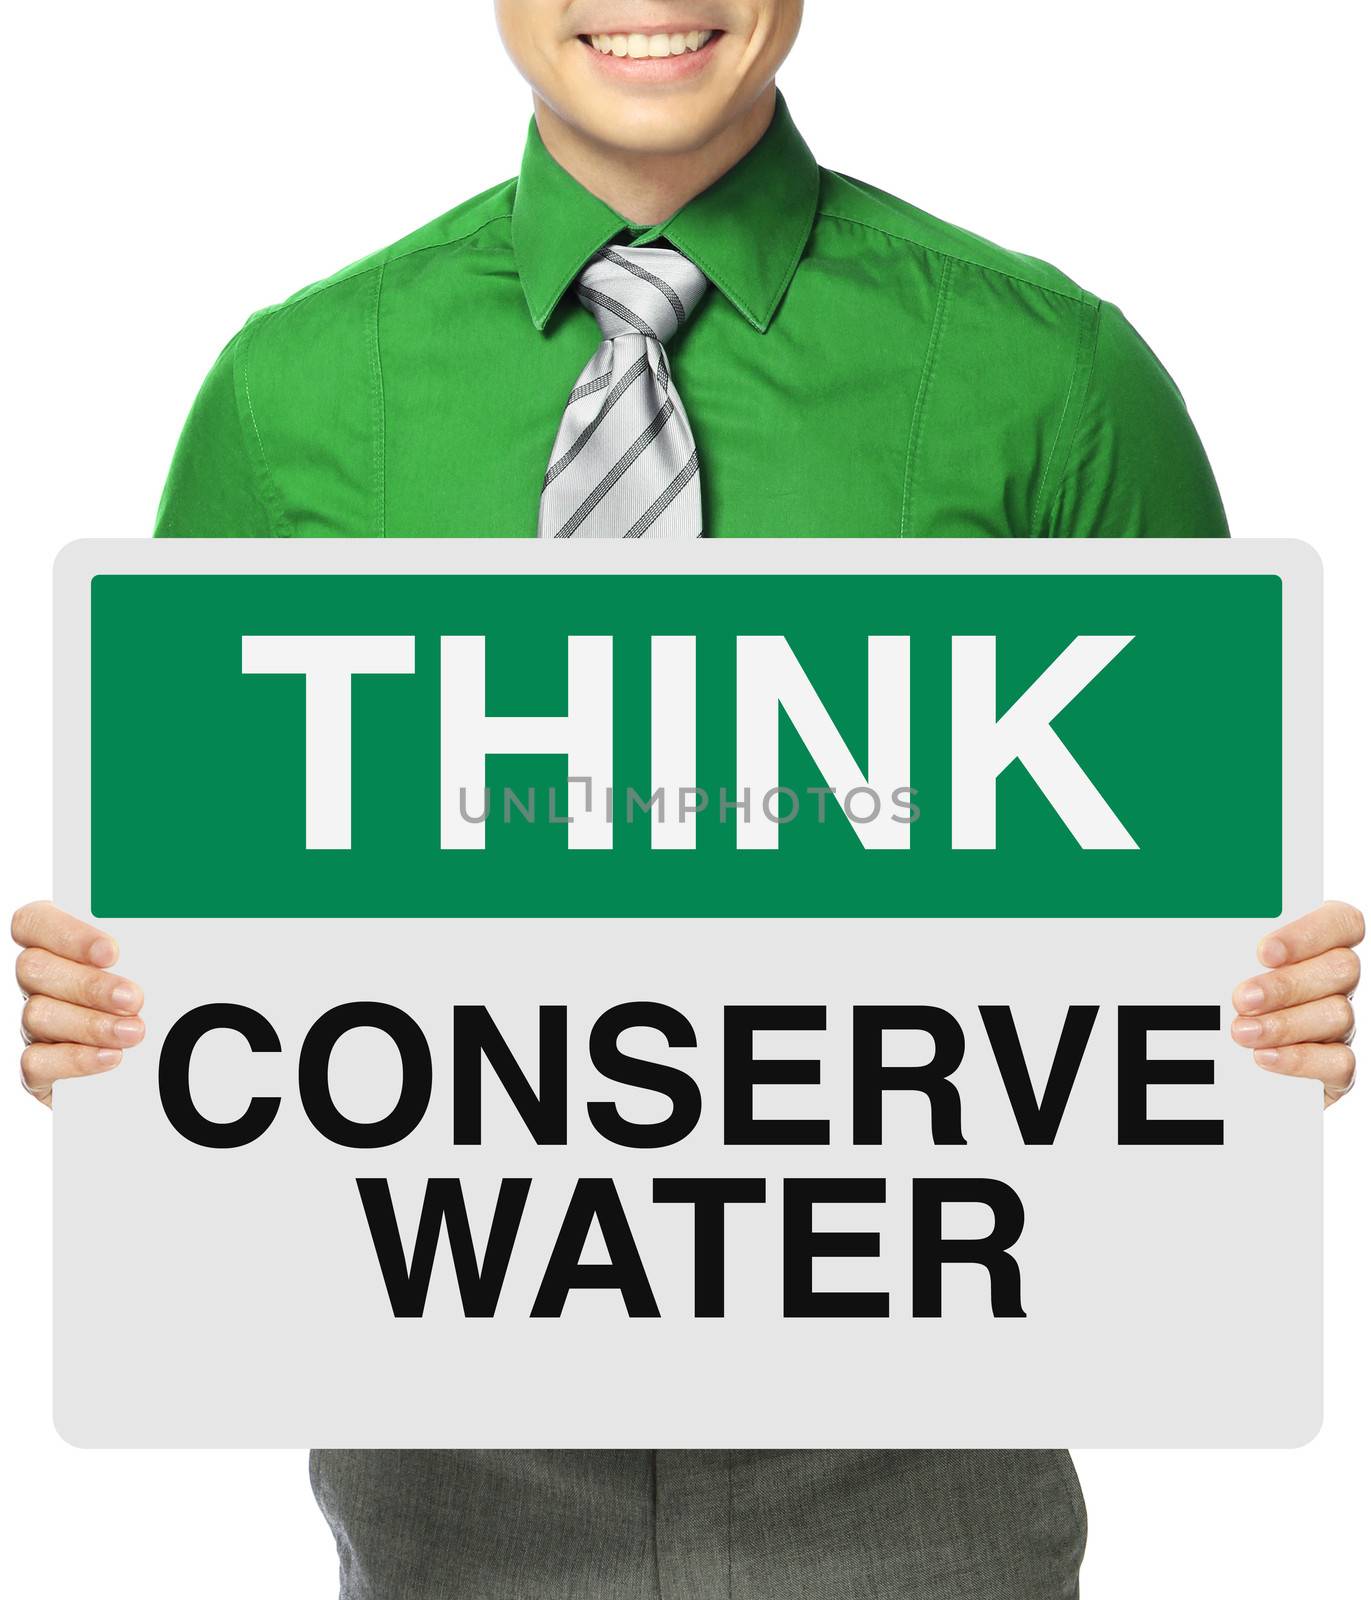 A man holding a signboard on water conservation